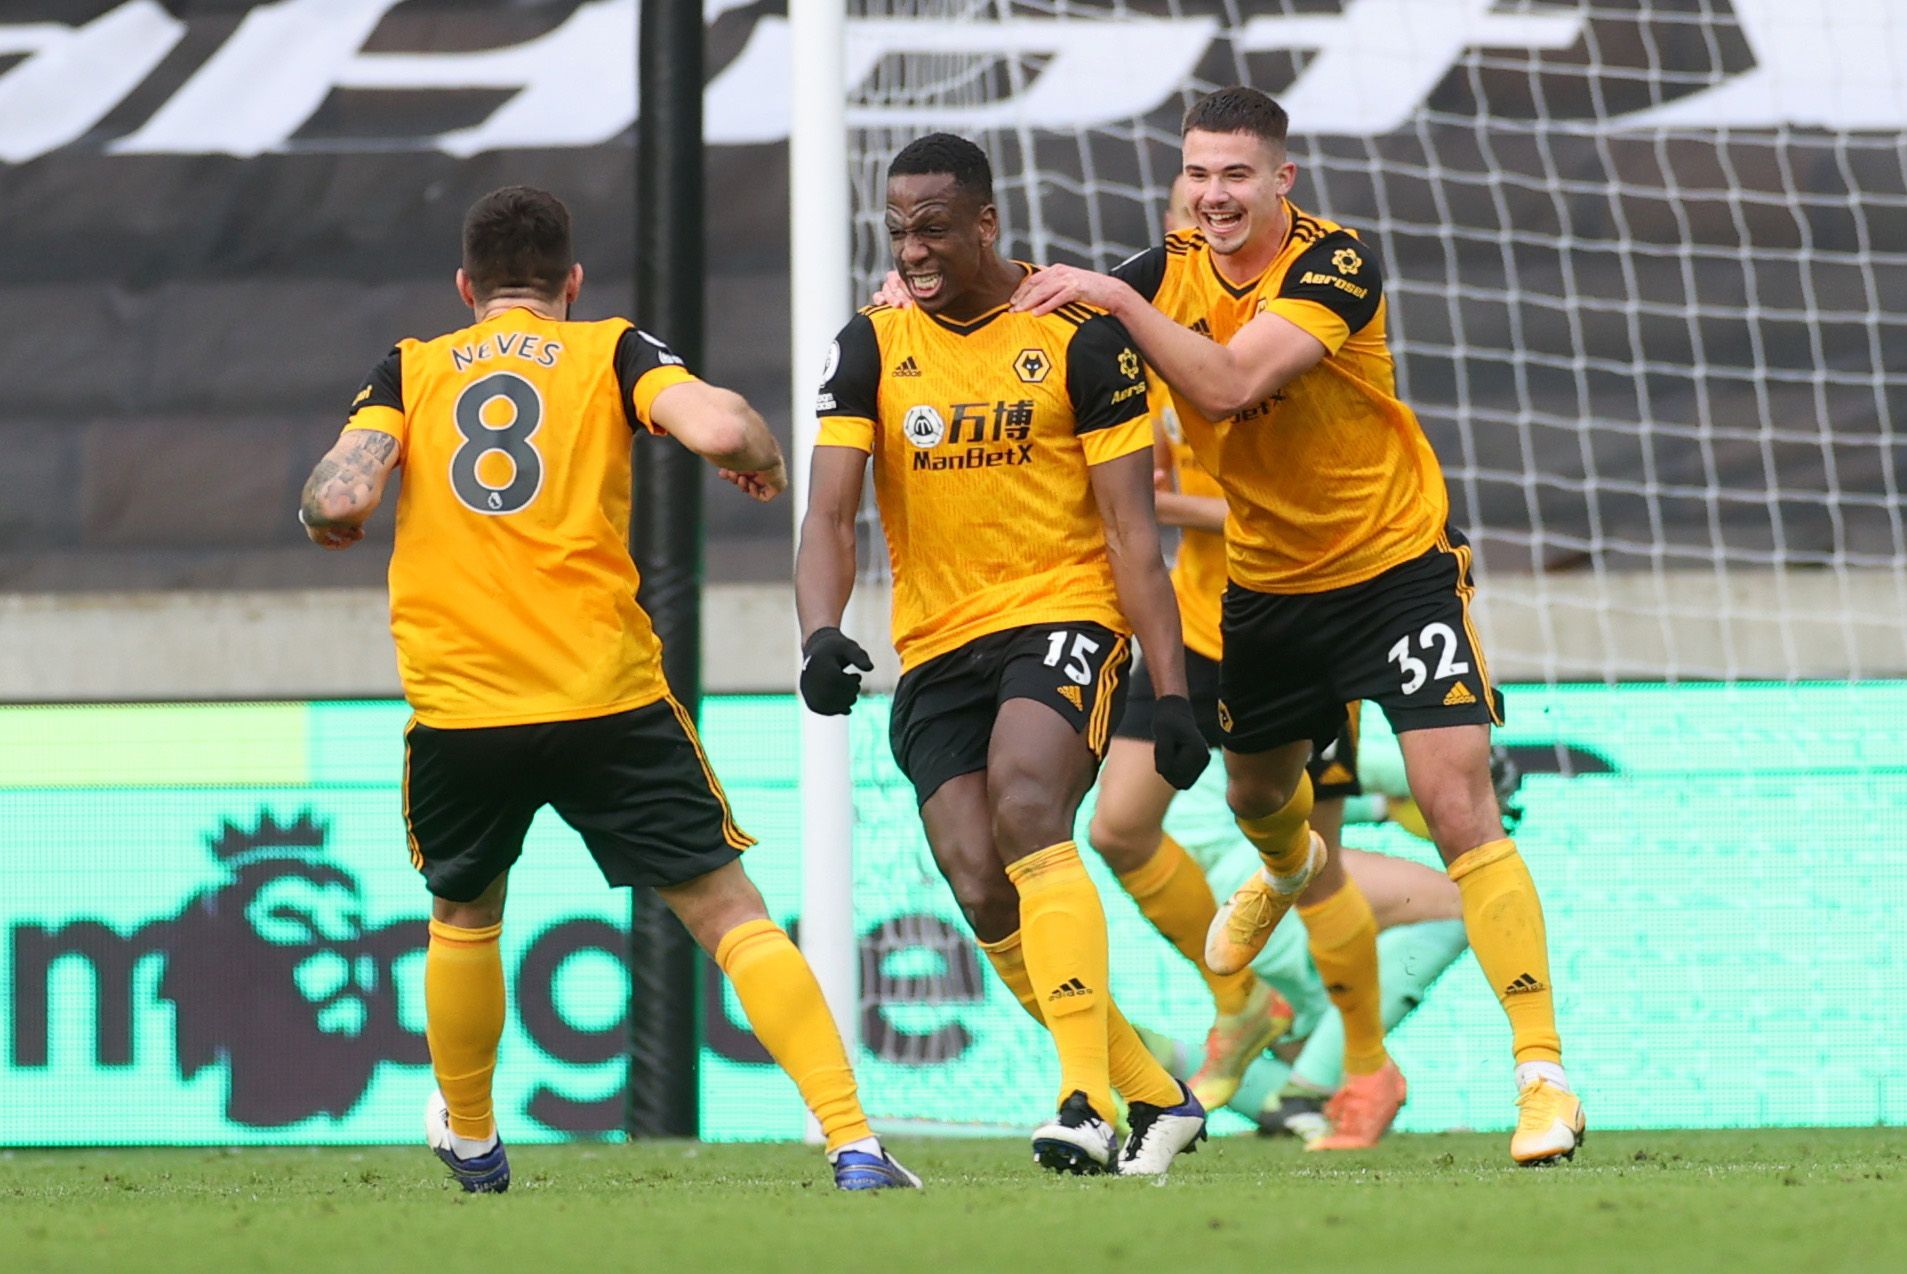 Willy Boly, Toti Gomes, Wolves, Molineux, Grasshopper, Wolverhampton Wanderers,